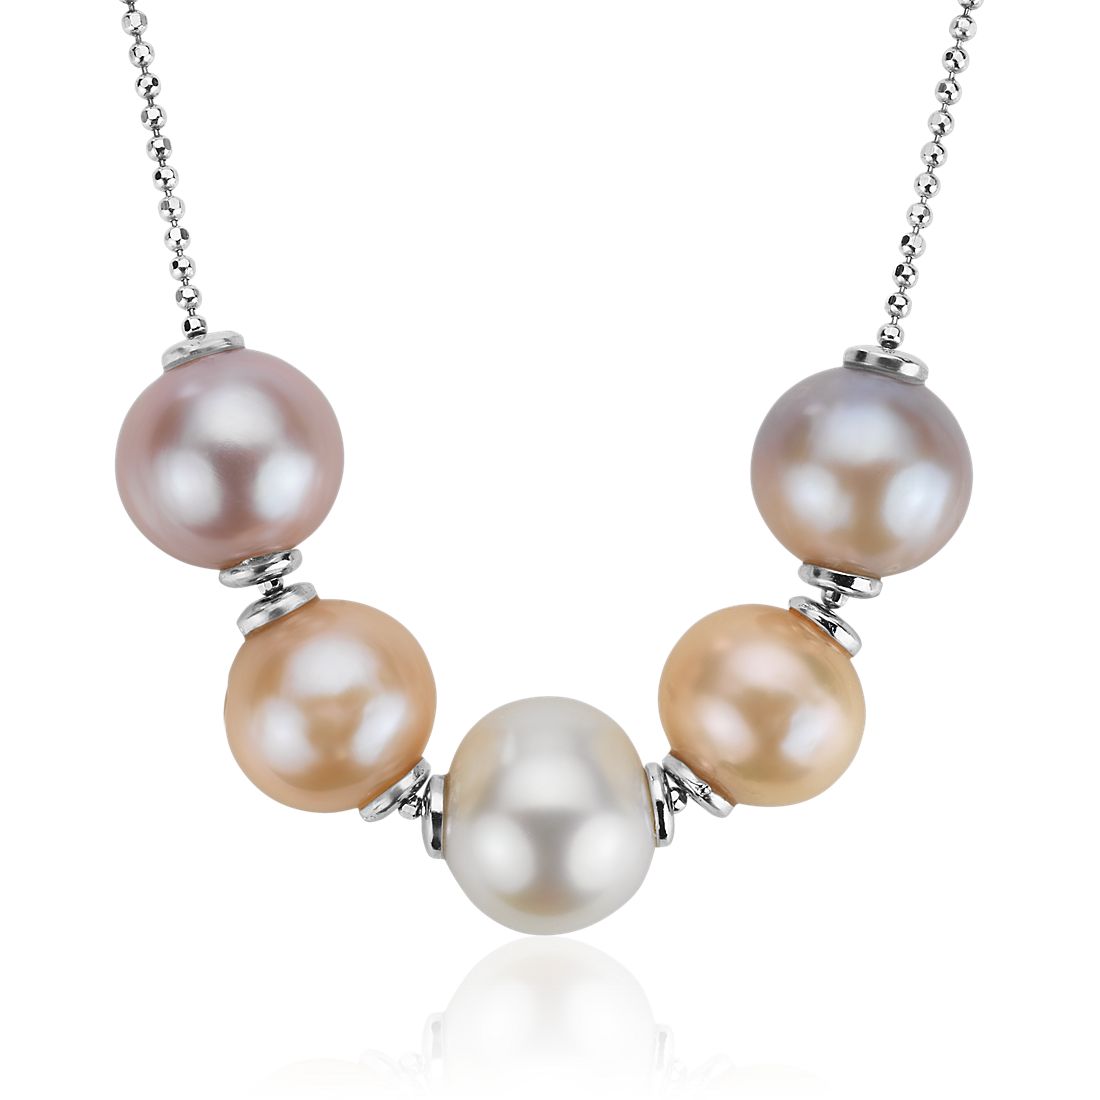 Details about  / Genuine Freshwater Cultured Pearl Sterling Silver Illusion Necklace